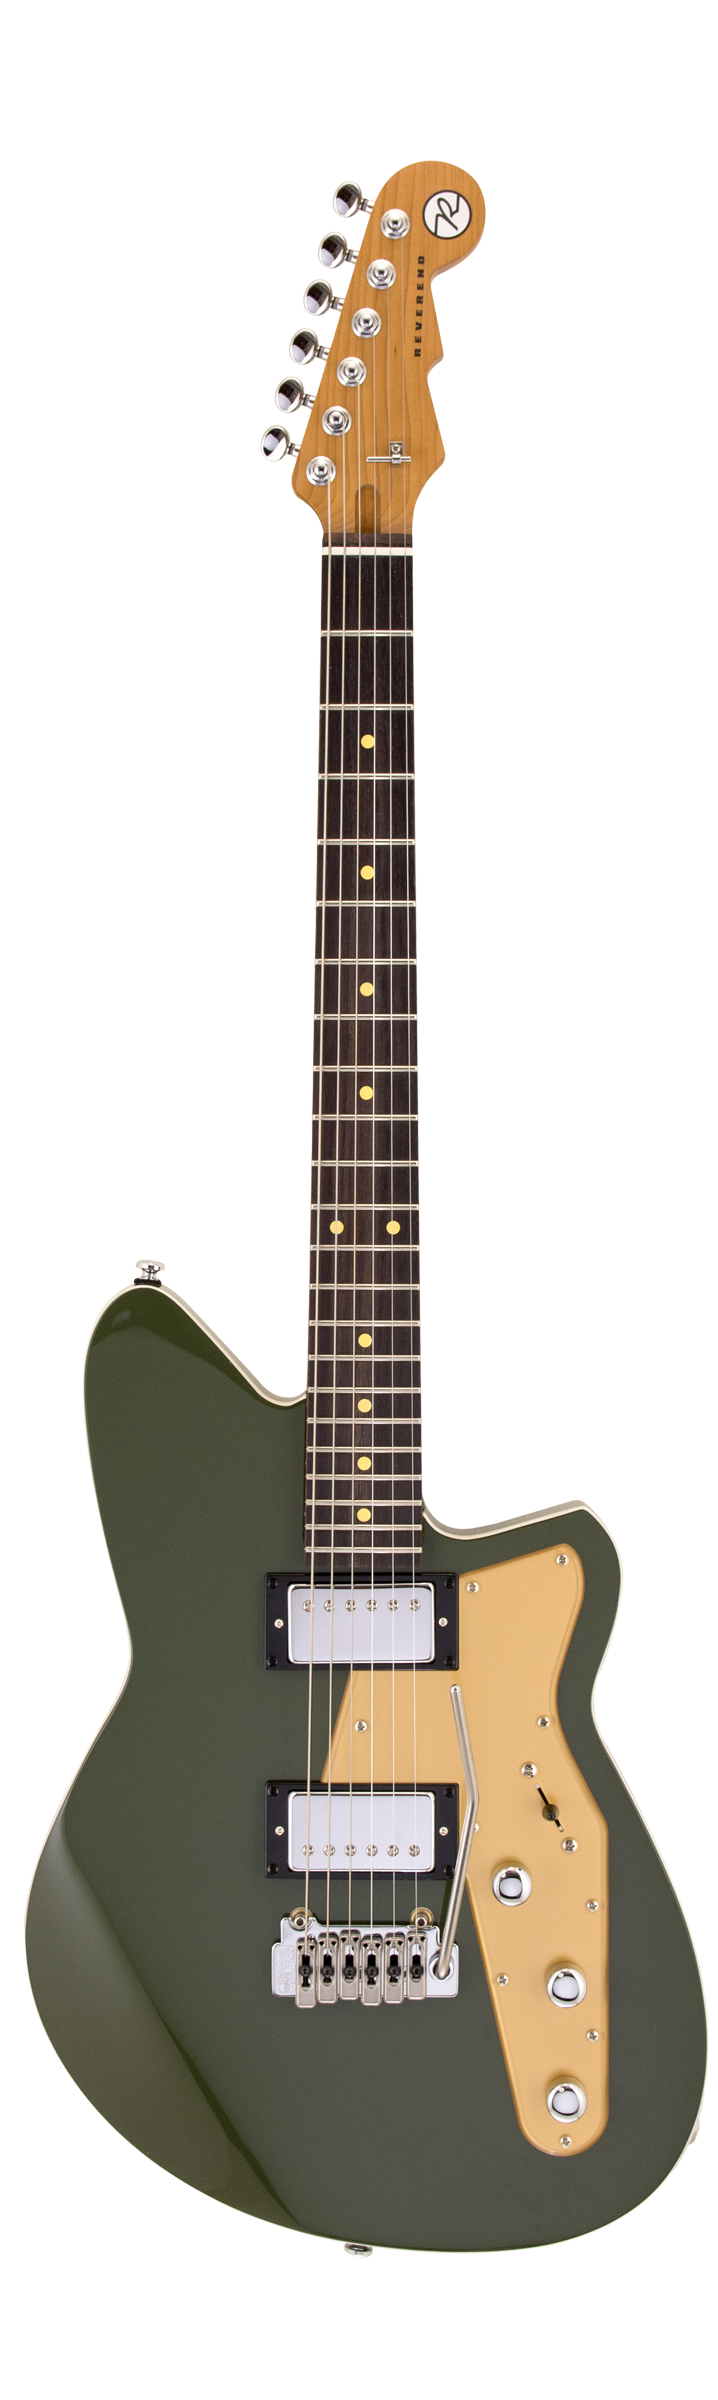 Reverend JETSTREAM HB Electric Guitar (Army Green)